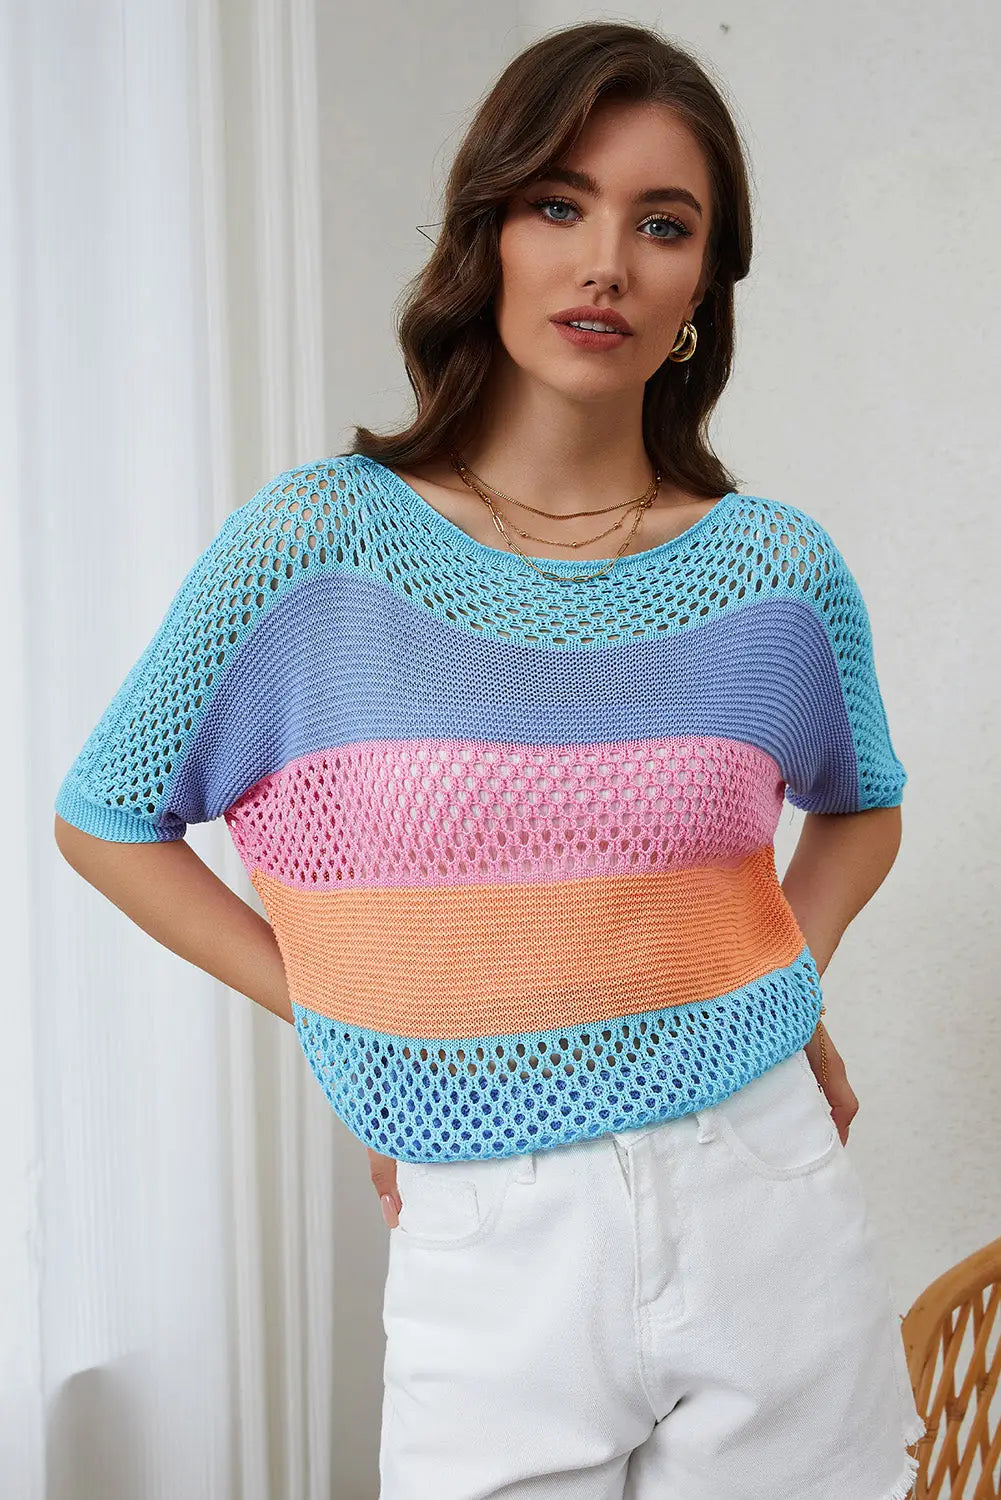 Sky blue knitted eyelet colorblock striped half sleeves top - s / 100% viscose - t-shirts